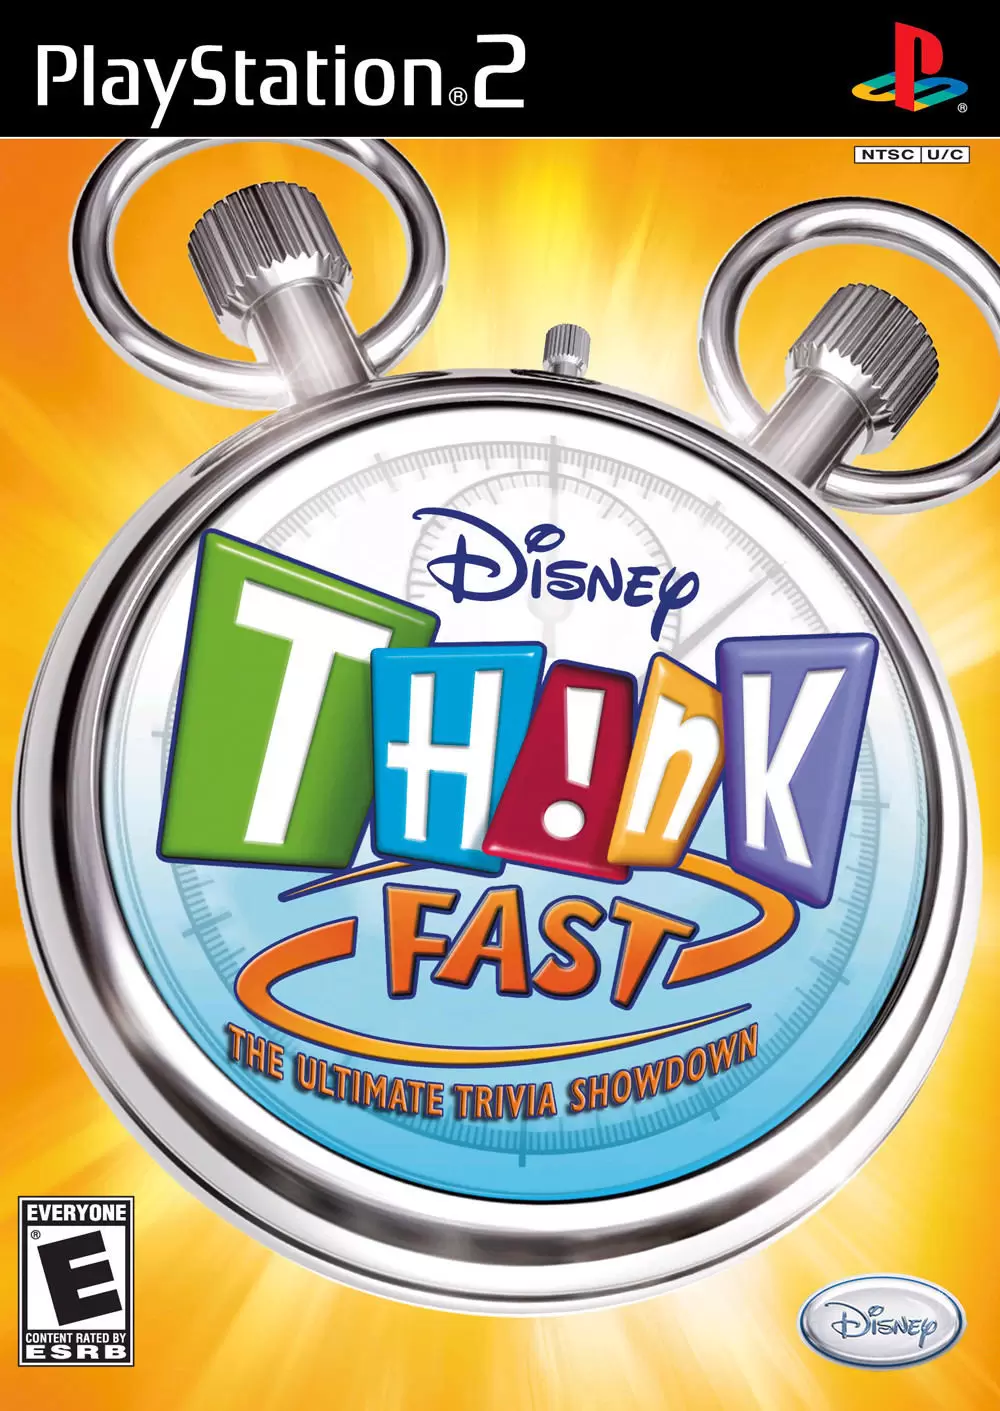 PS2 Games - Disney Think Fast